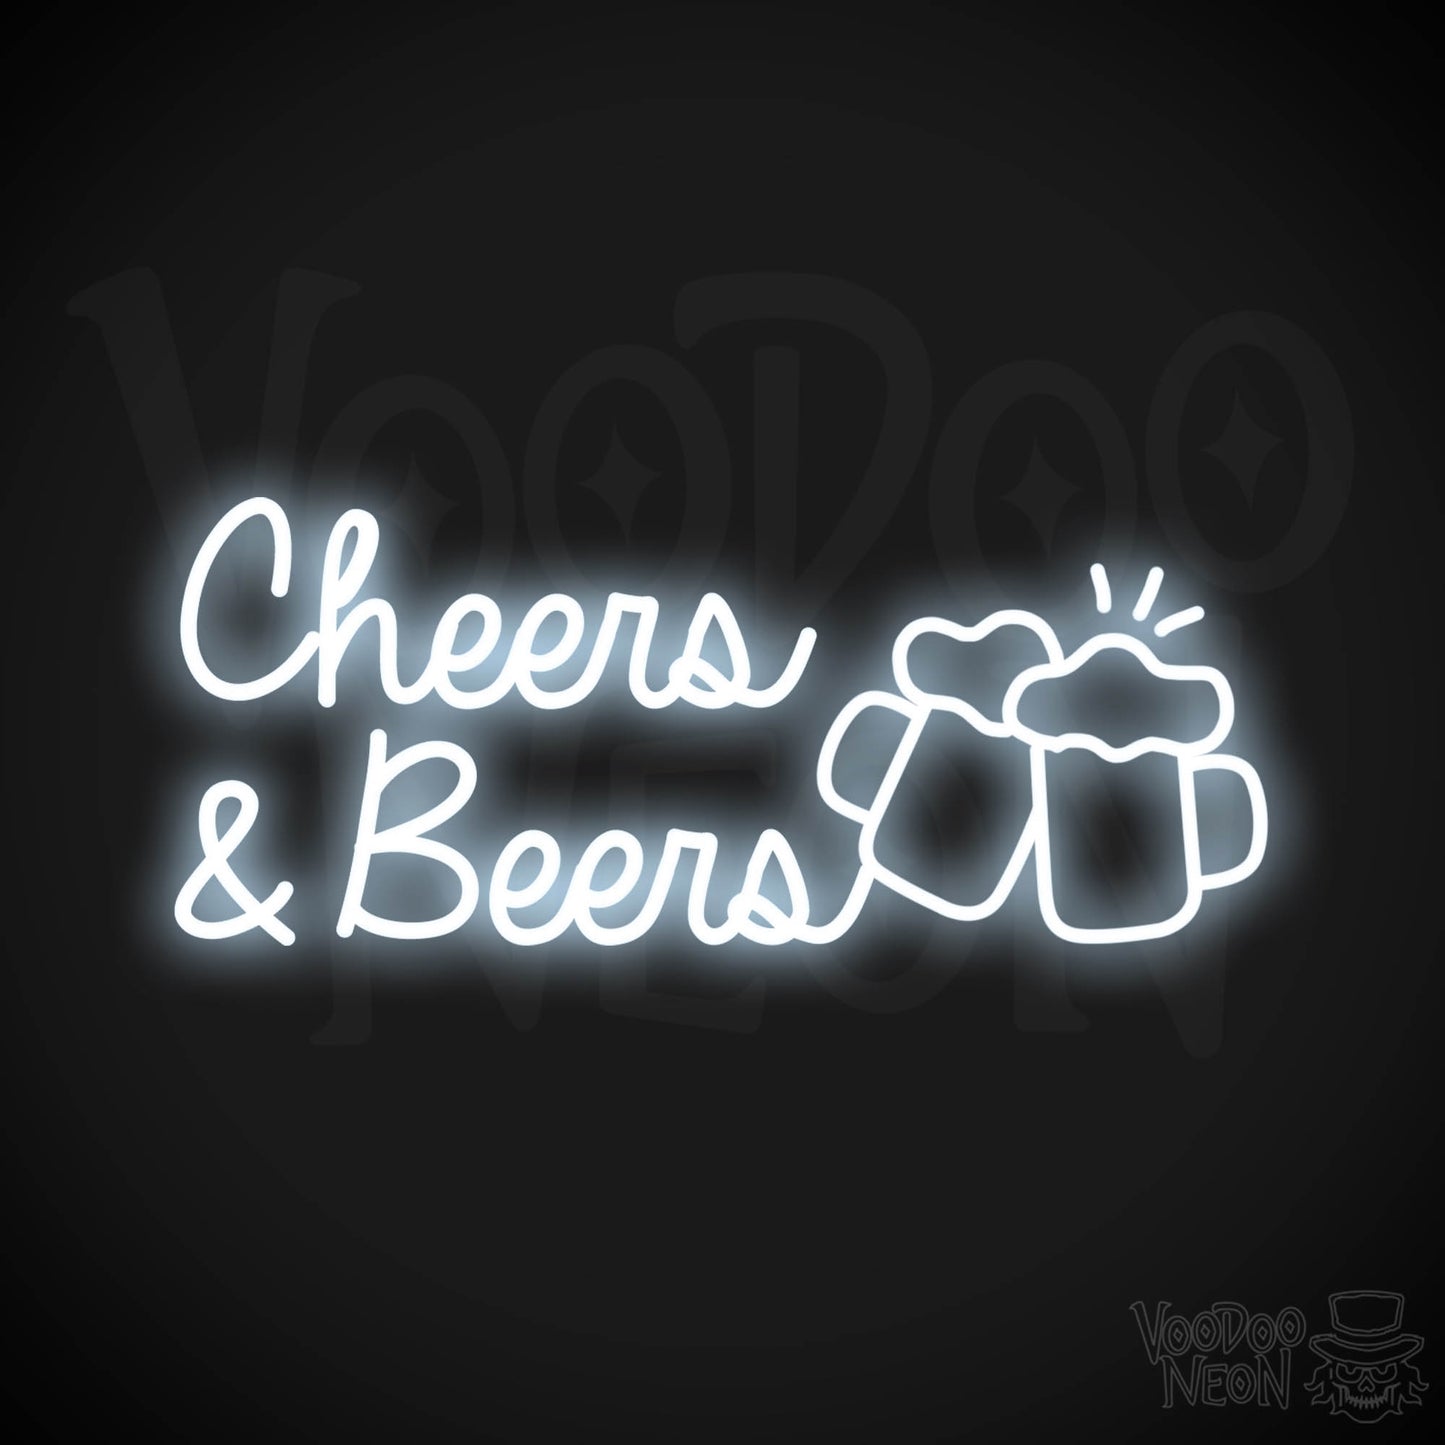 Cheers & Beers LED Neon - Cool White